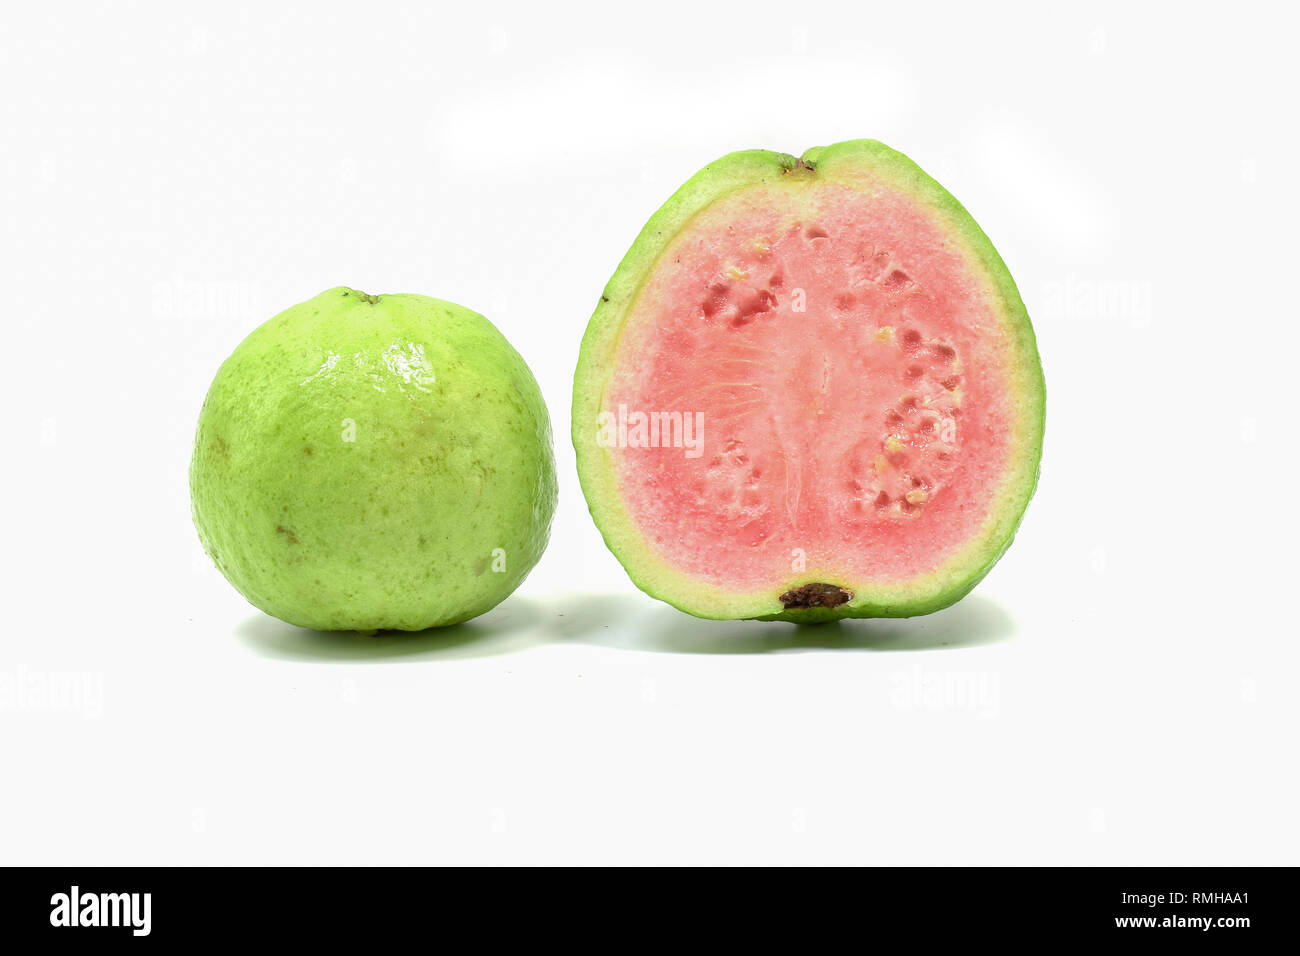 Red guava Stock Photo